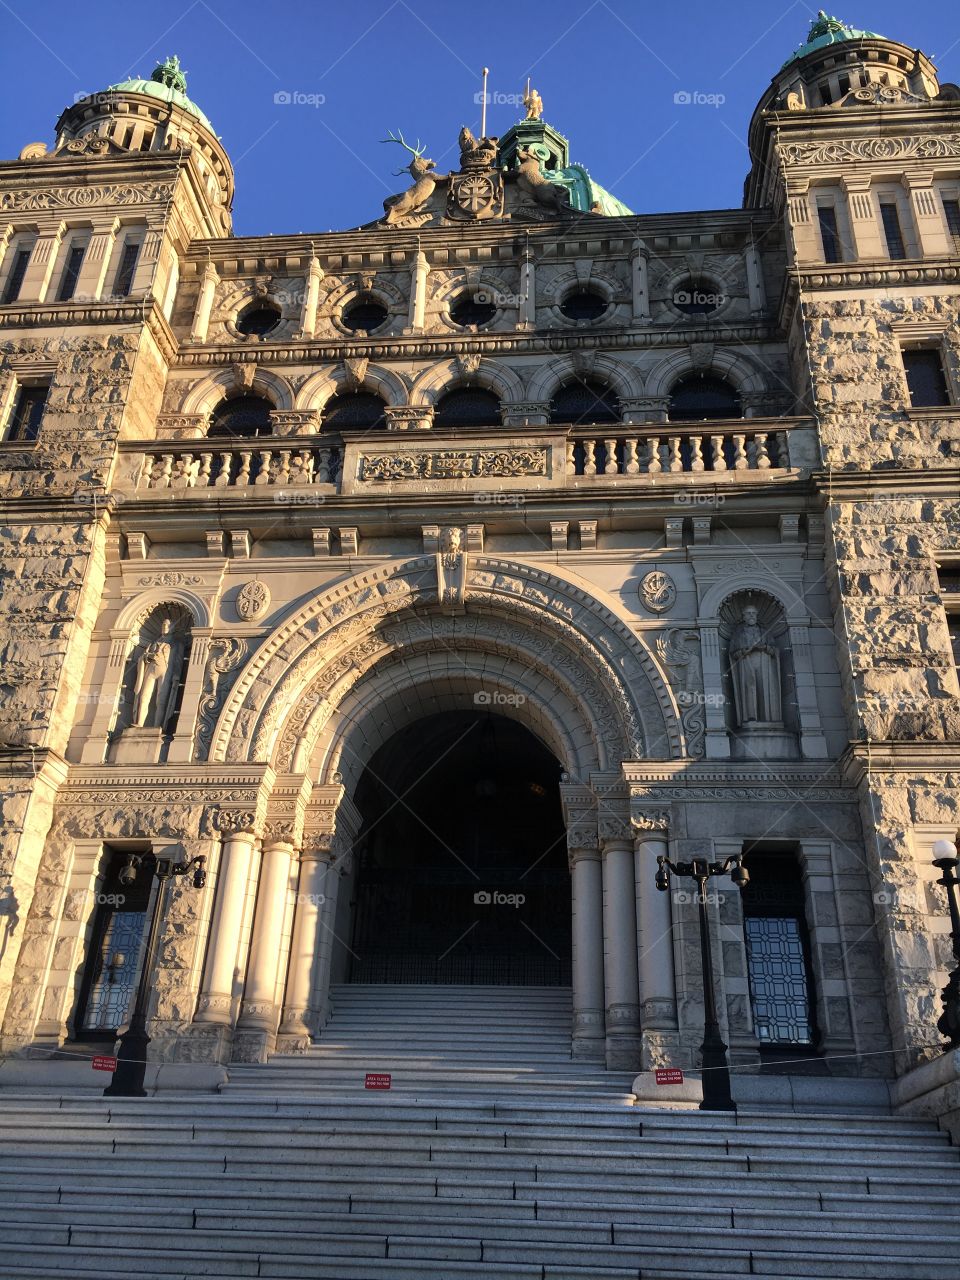 The political building of Vancouver 